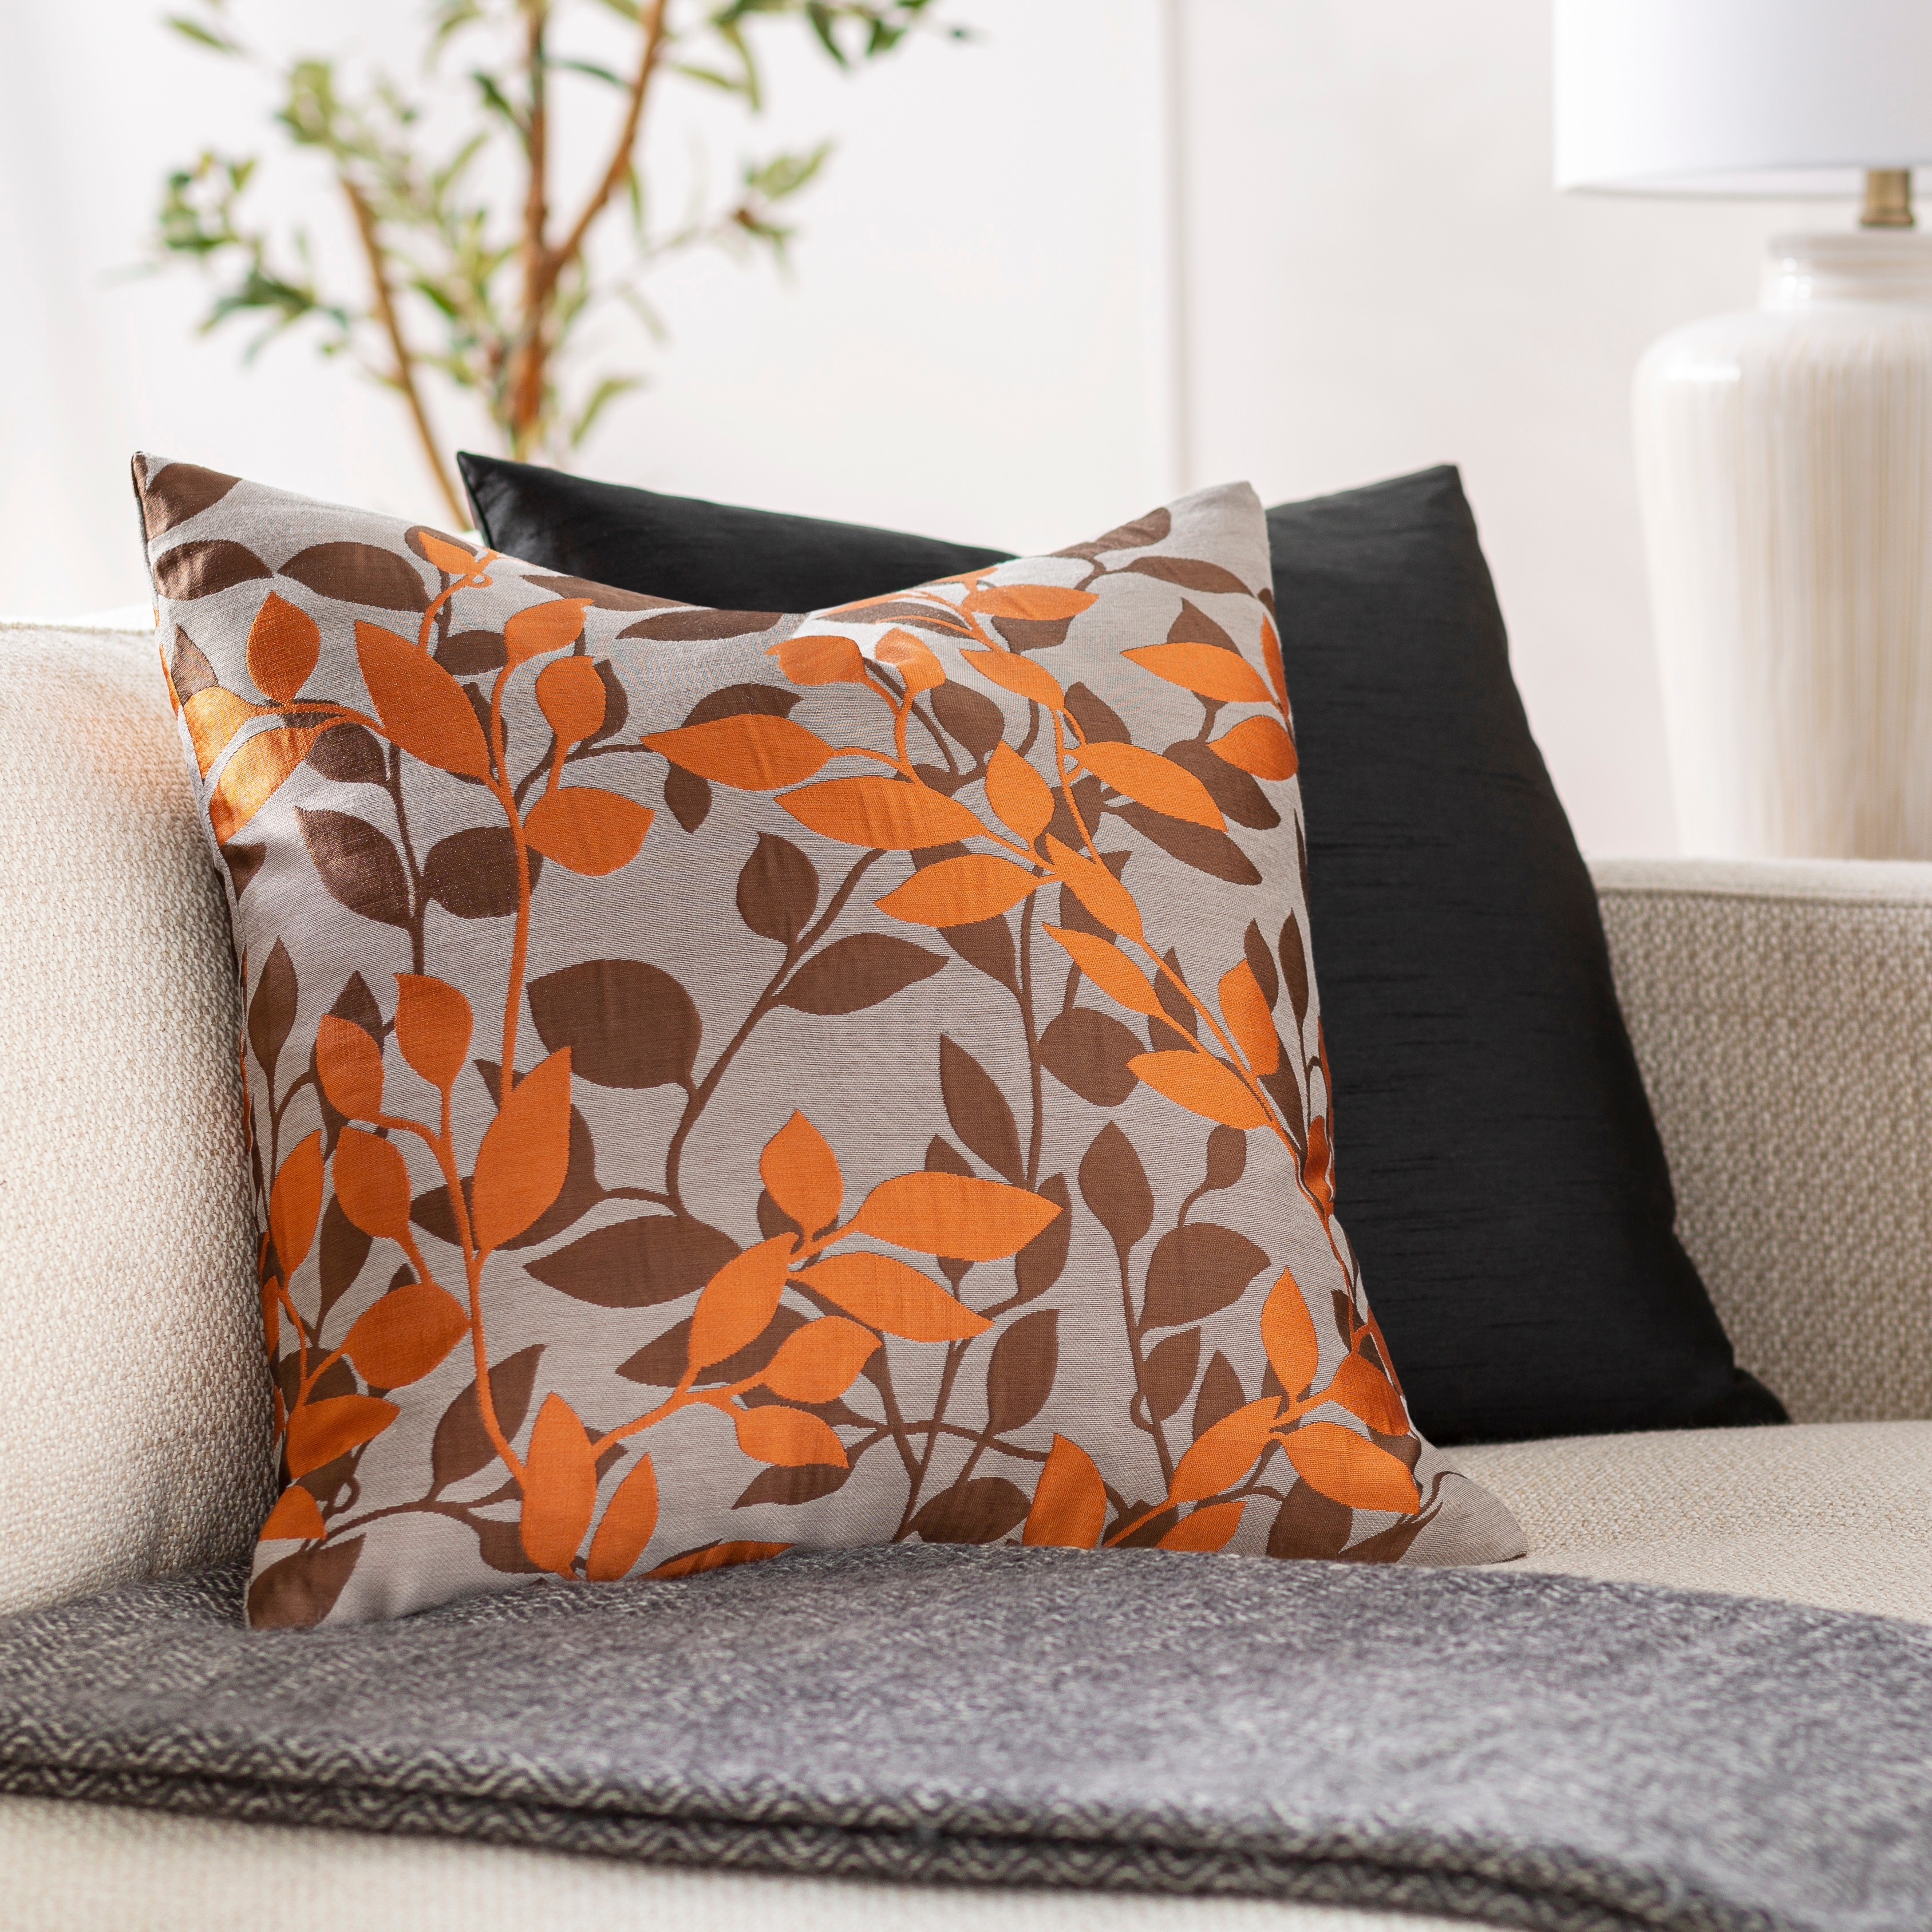 https://ak1.ostkcdn.com/images/products/is/images/direct/949df59fc2c59463f03aaf85b0db99819a2c8ad7/Decorative-Skegness-Rust-18-inch-Leaves-Throw-Pillow-Cover.jpg